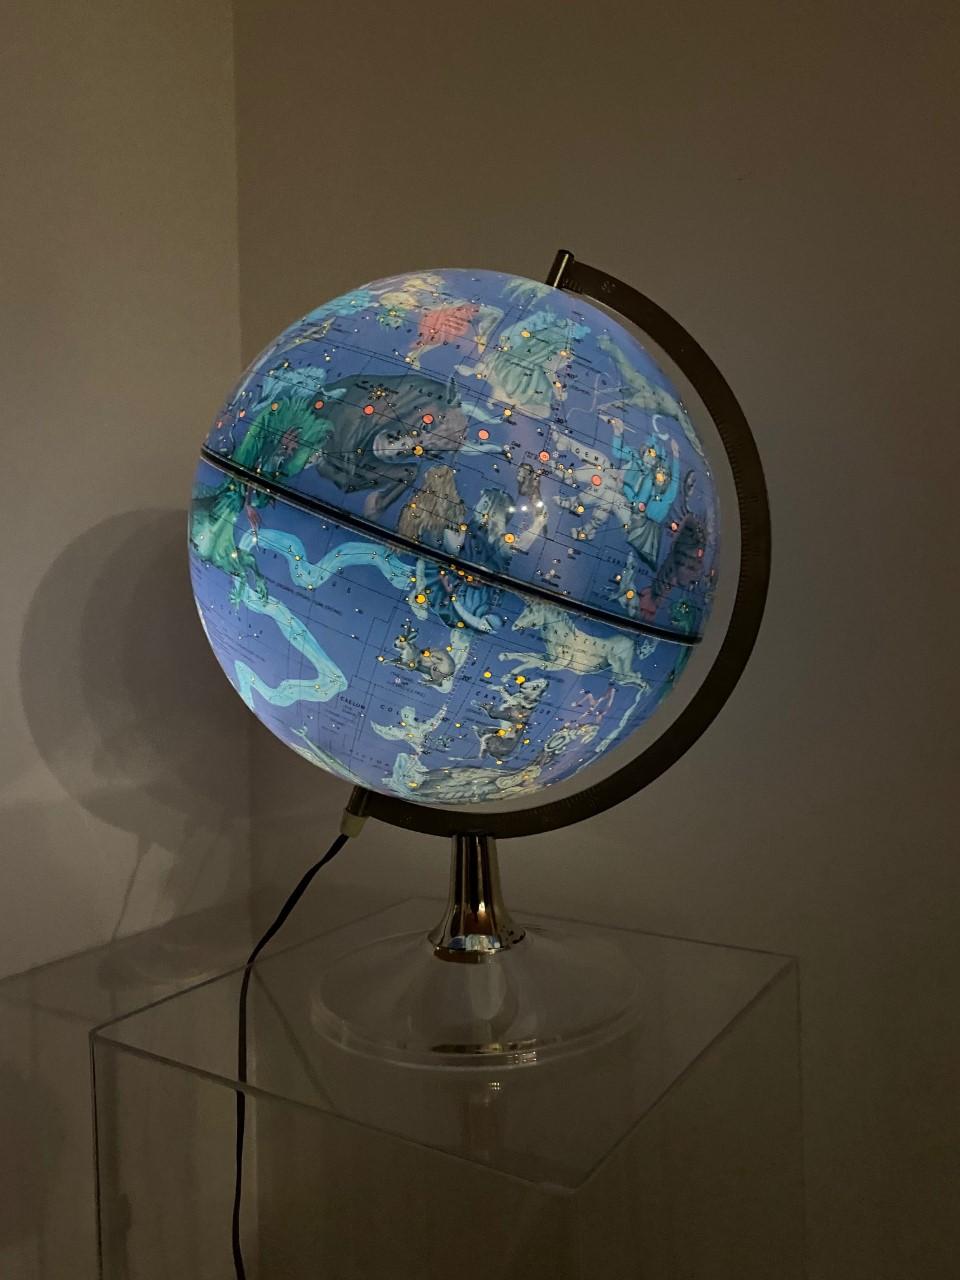 Beautiful illuminated constellation globe. This piece is magical, glamorous and chic. The lucite base holds the beautiful blue globe that when illuminated reveals the constellations in their most magical and artistic form. Cartography for this piece